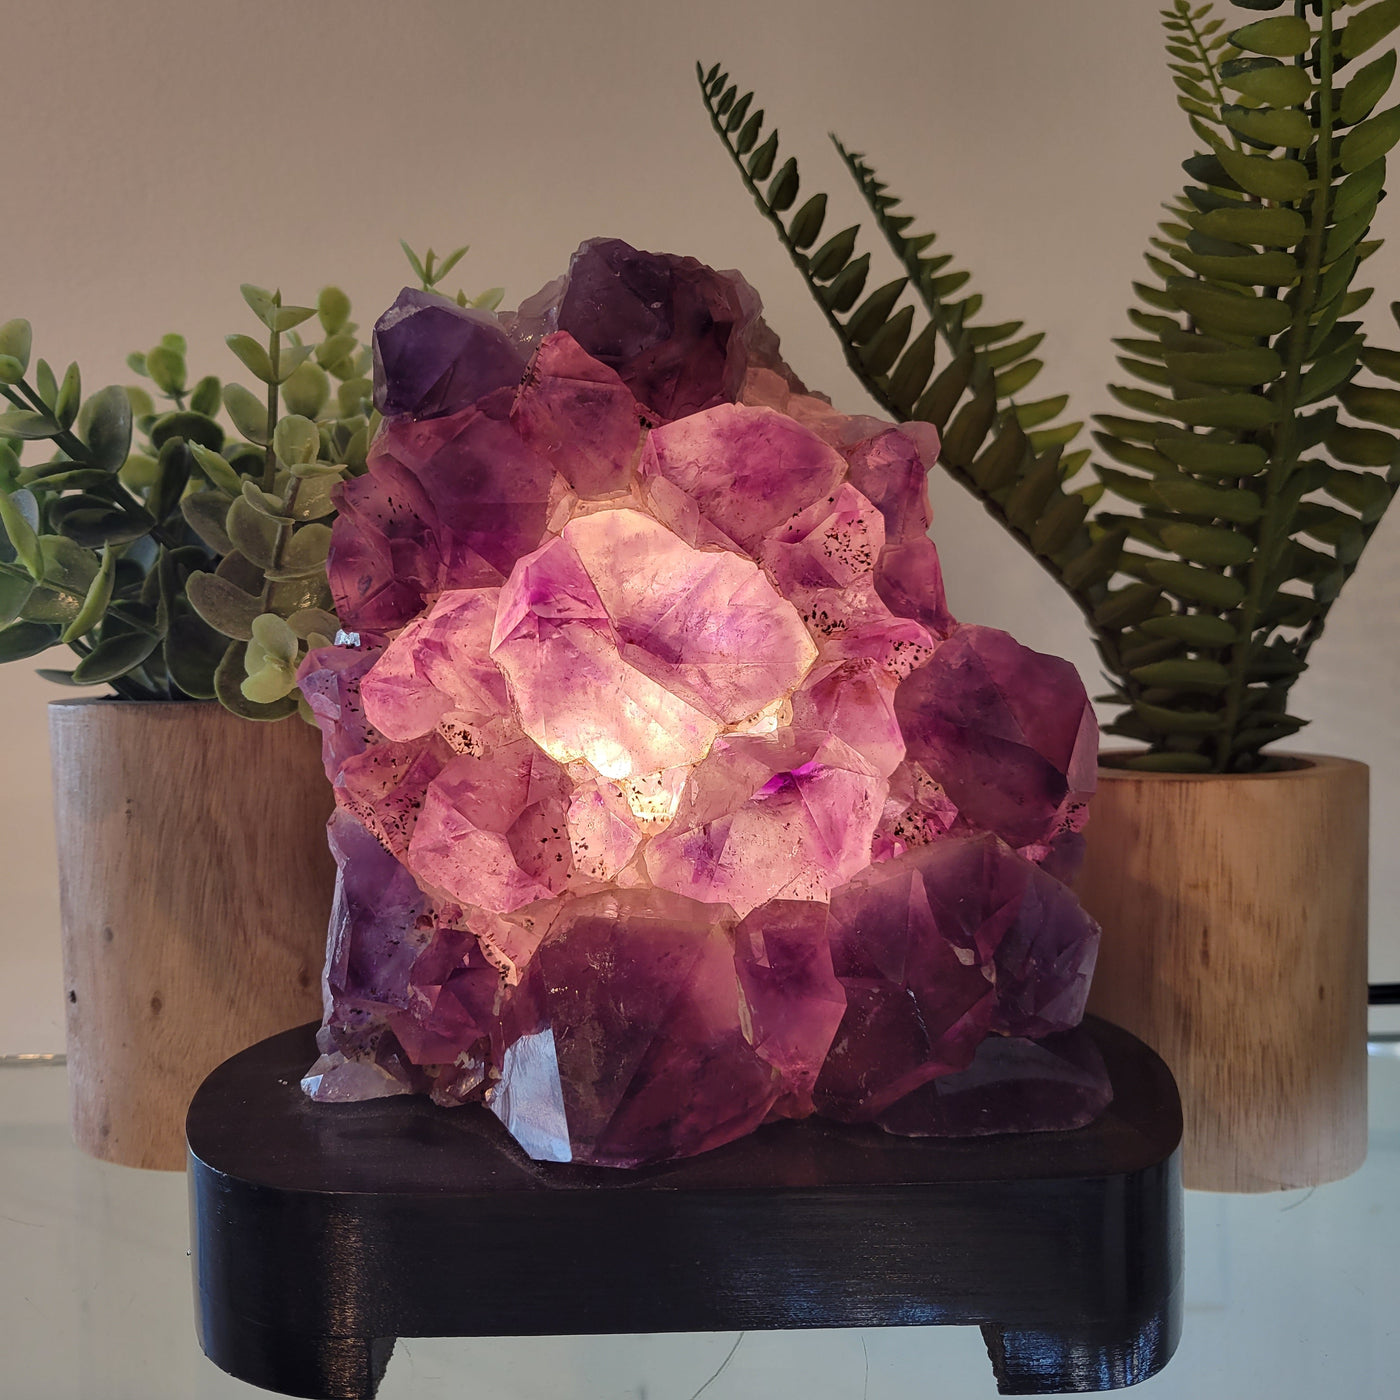 Amethyst Cluster Lamp on Wood Base 5-8” tall come with bulb and cord